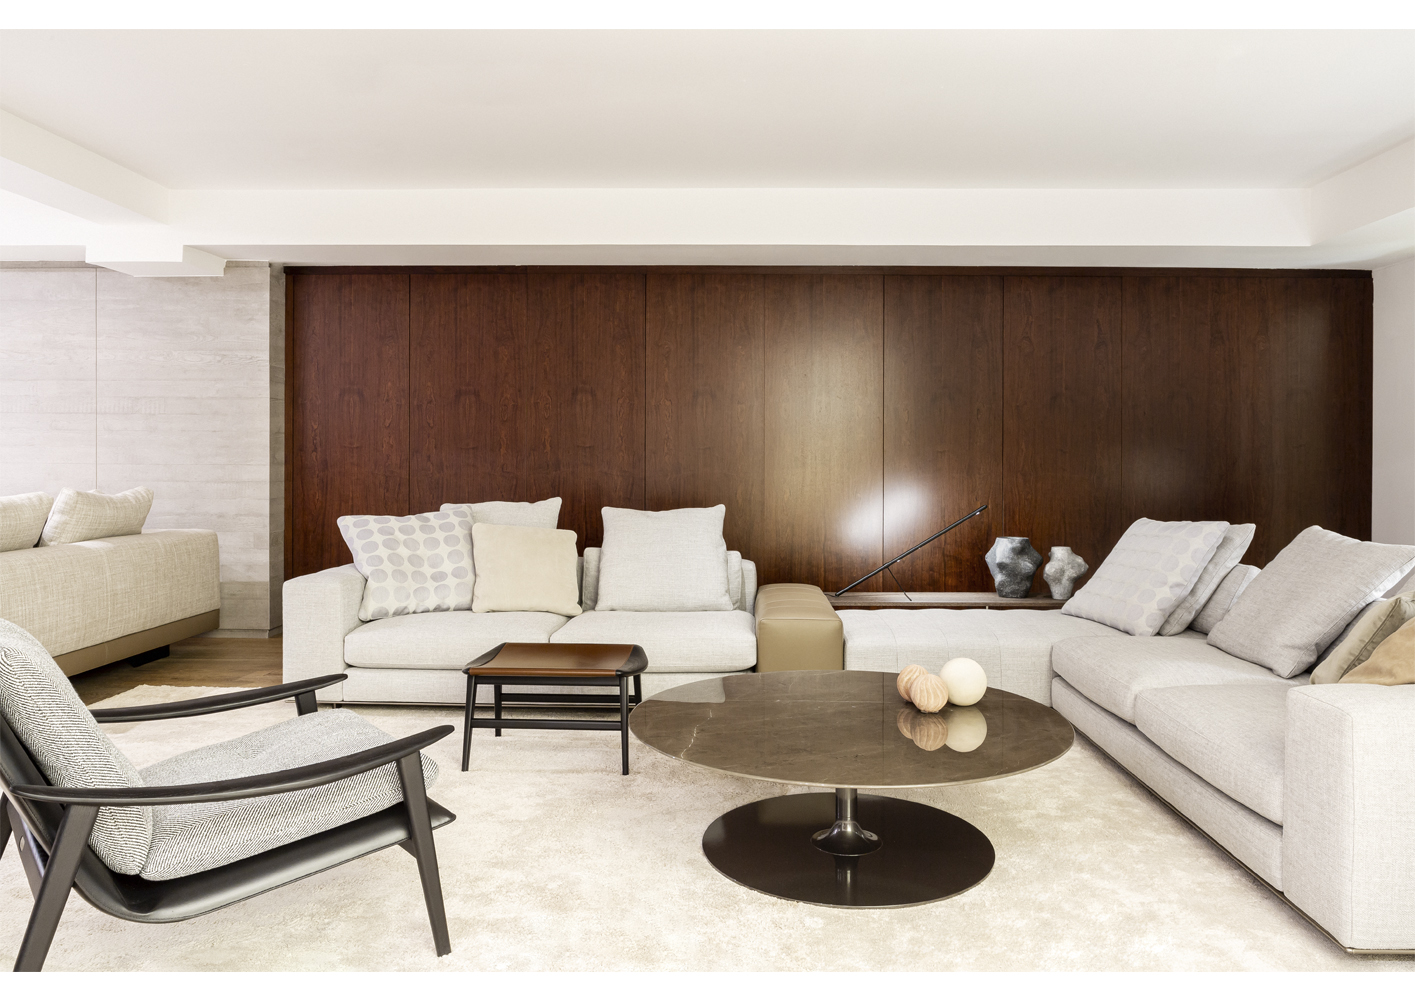 Minotti Madrid by Concepto DR